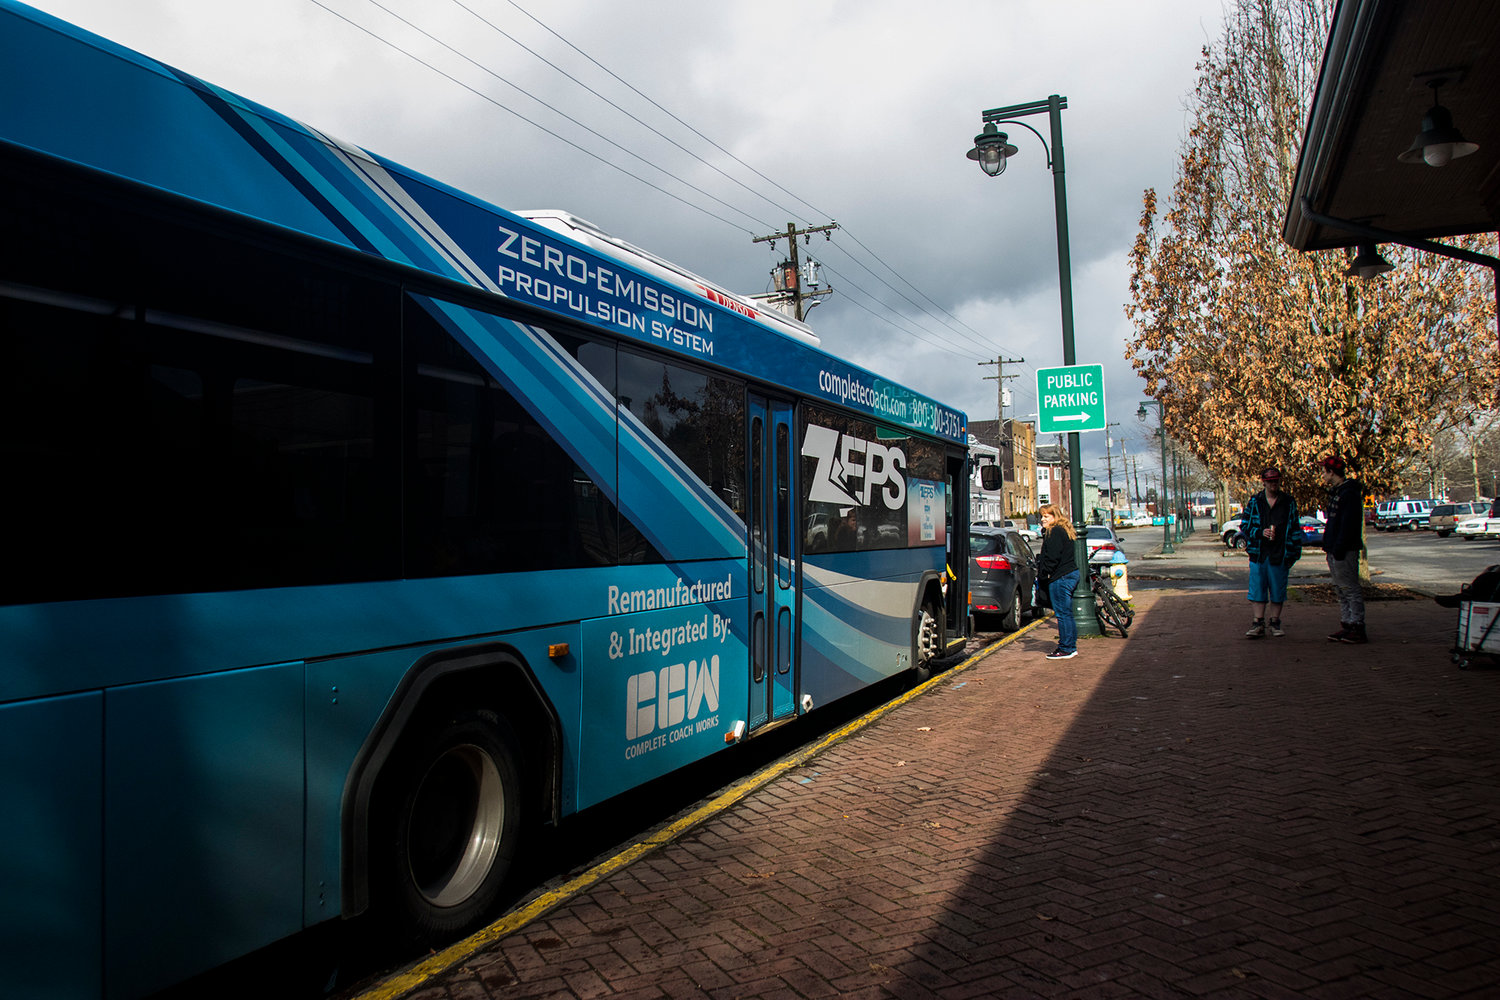 The Twin Transit demonstration electric bus is seen Monday afternoon in front of the Centralia Train Depot. The bus features a zero-emission propulsion system.